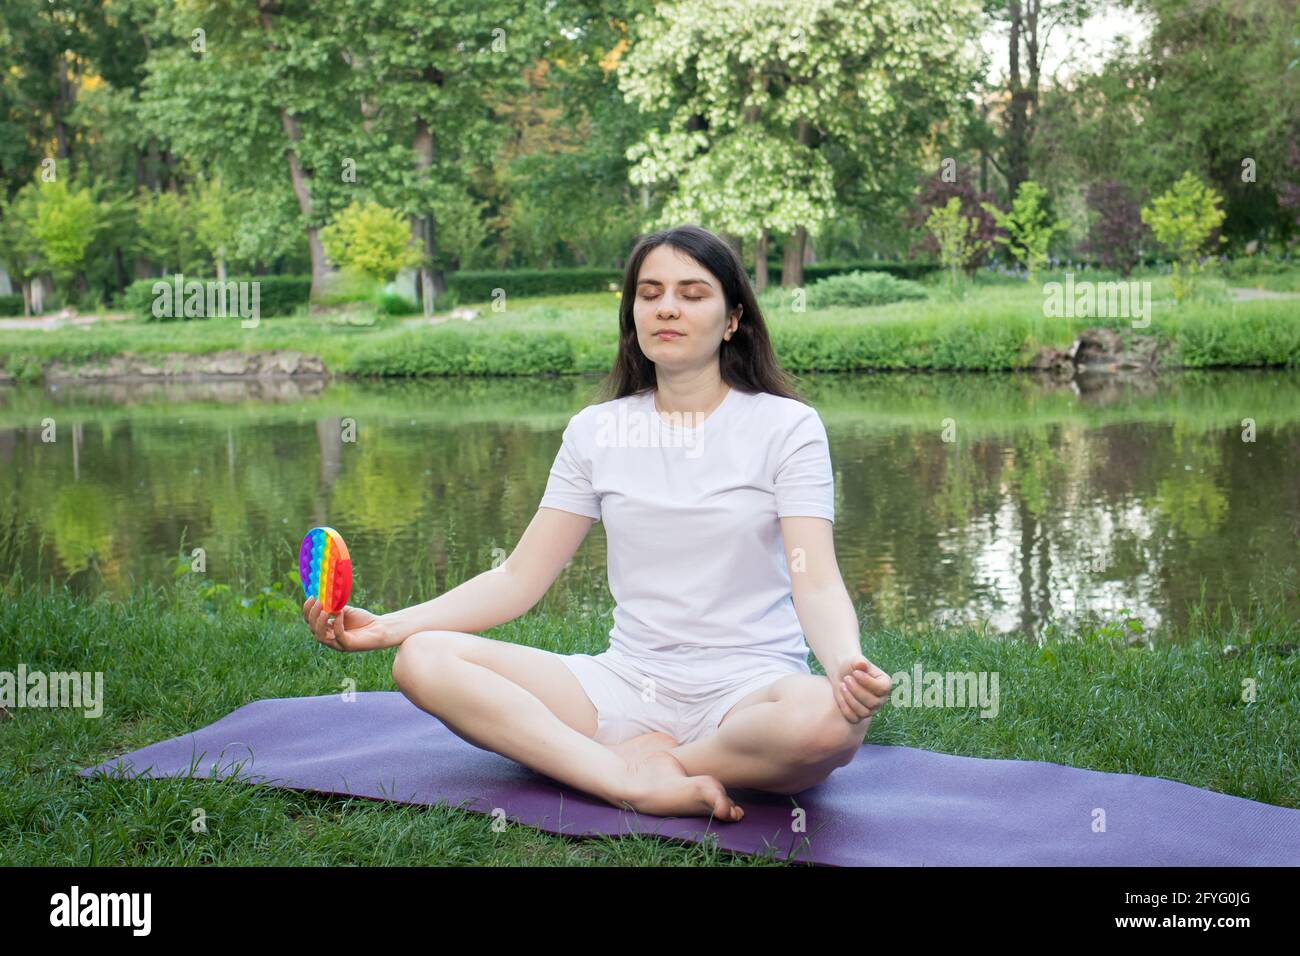 A woman meditates in nature and eats a reusable bubble wrap pop it  antistress toy. Deal with stress at work with Pop it, yoga and meditation  Stock Photo - Alamy